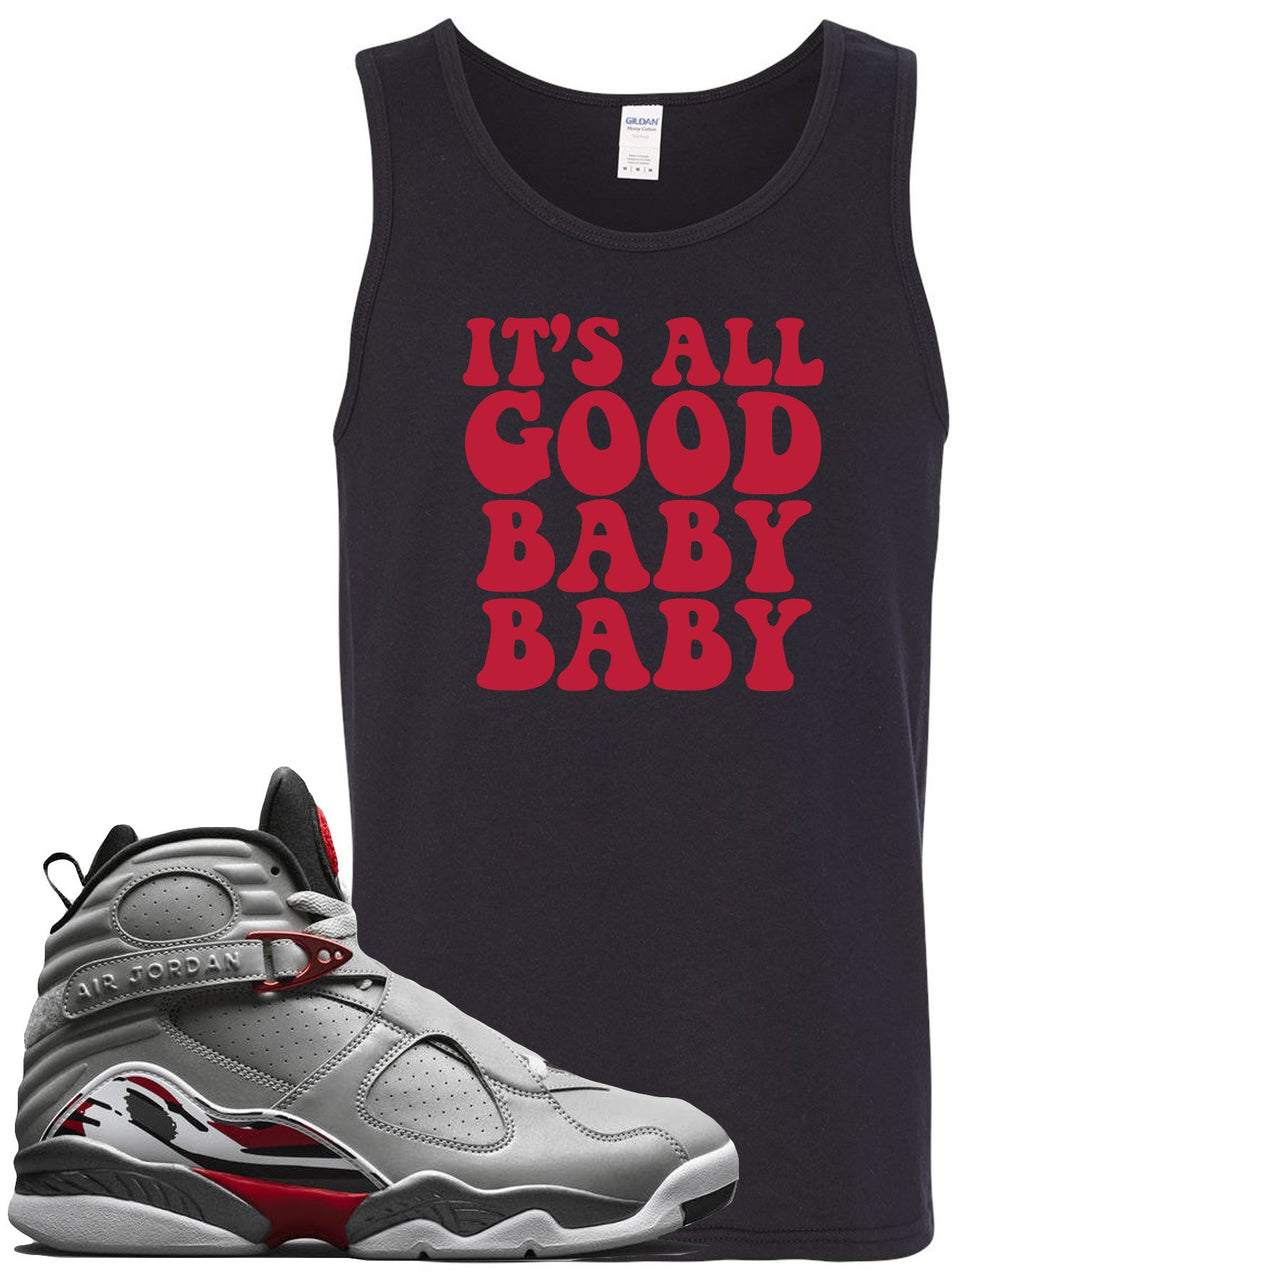 Reflections of a Champion 8s Mens Tank Top | It's All Good Baby Baby, Black